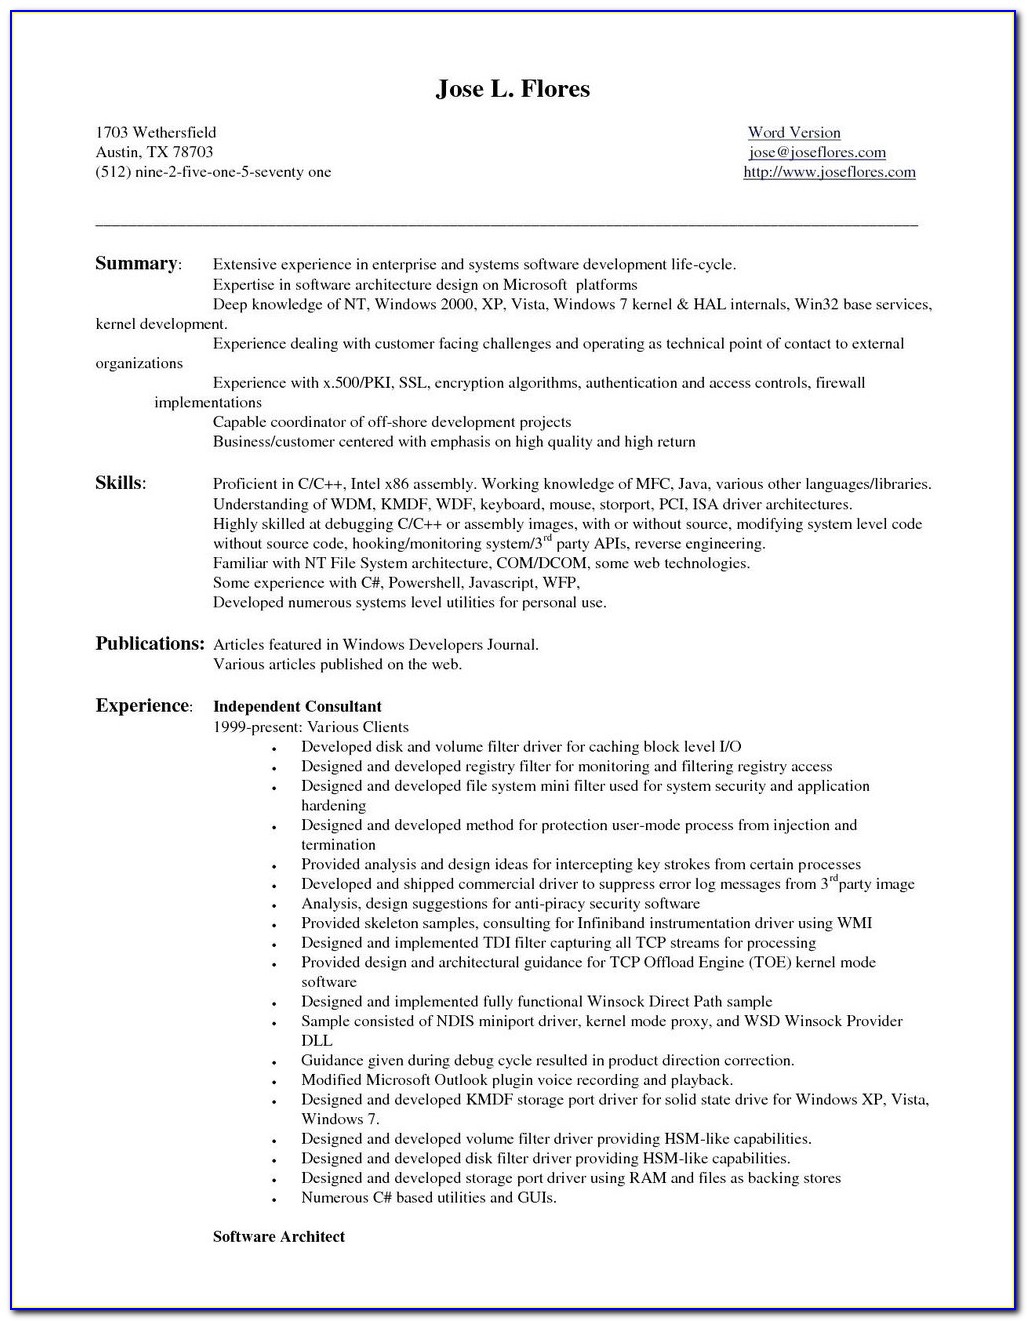 Free Entry Level Resume Templates For Word